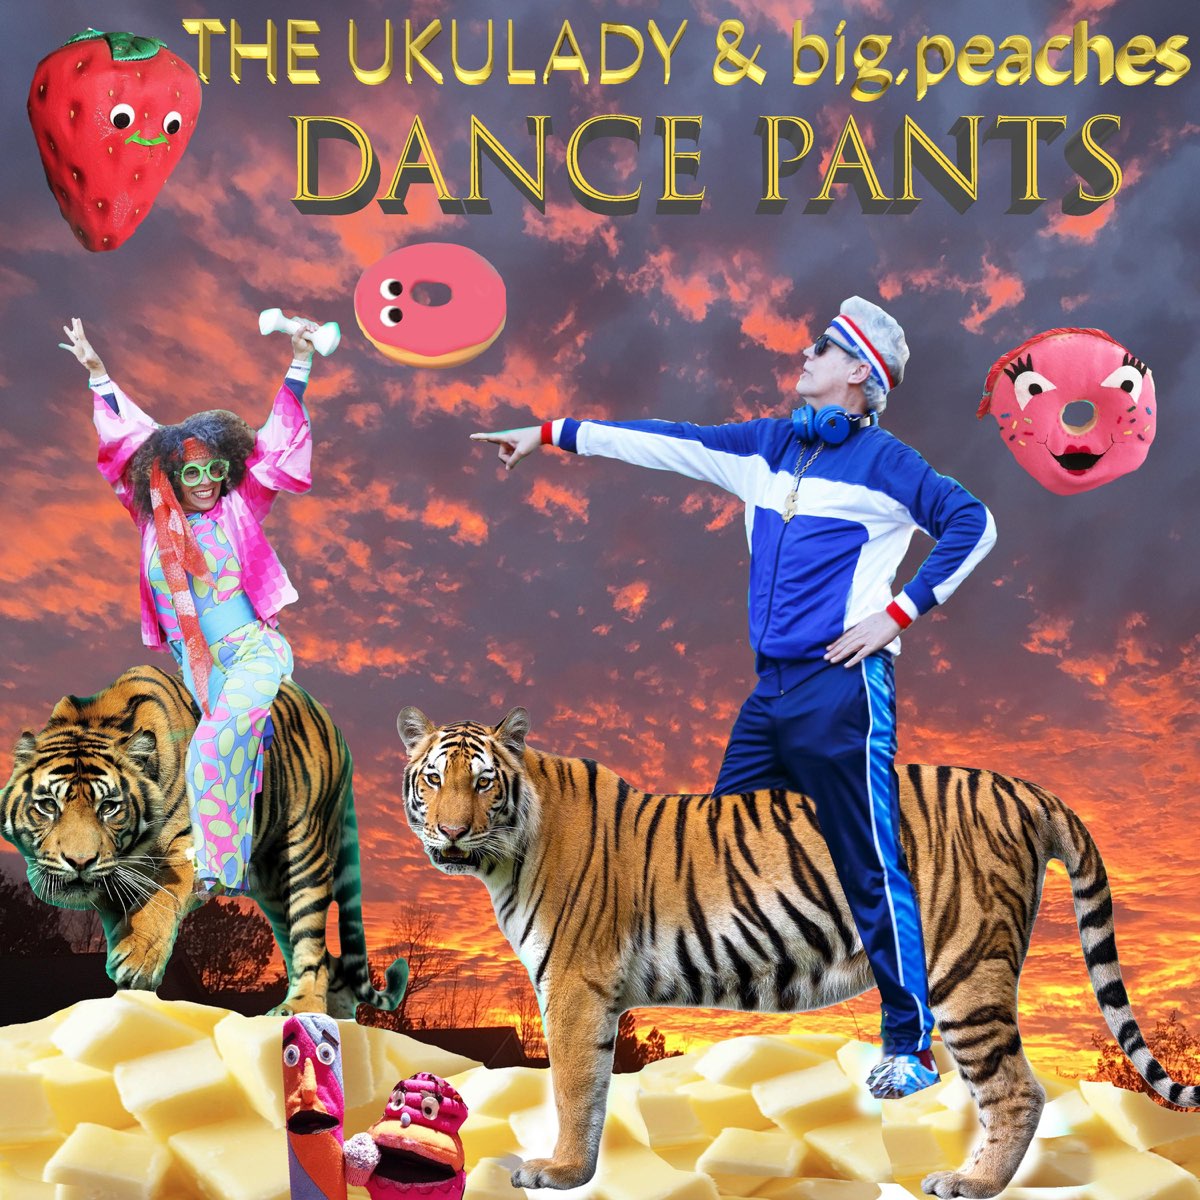 Dance Pants by The Ukulady & Big.peaches on  Music 